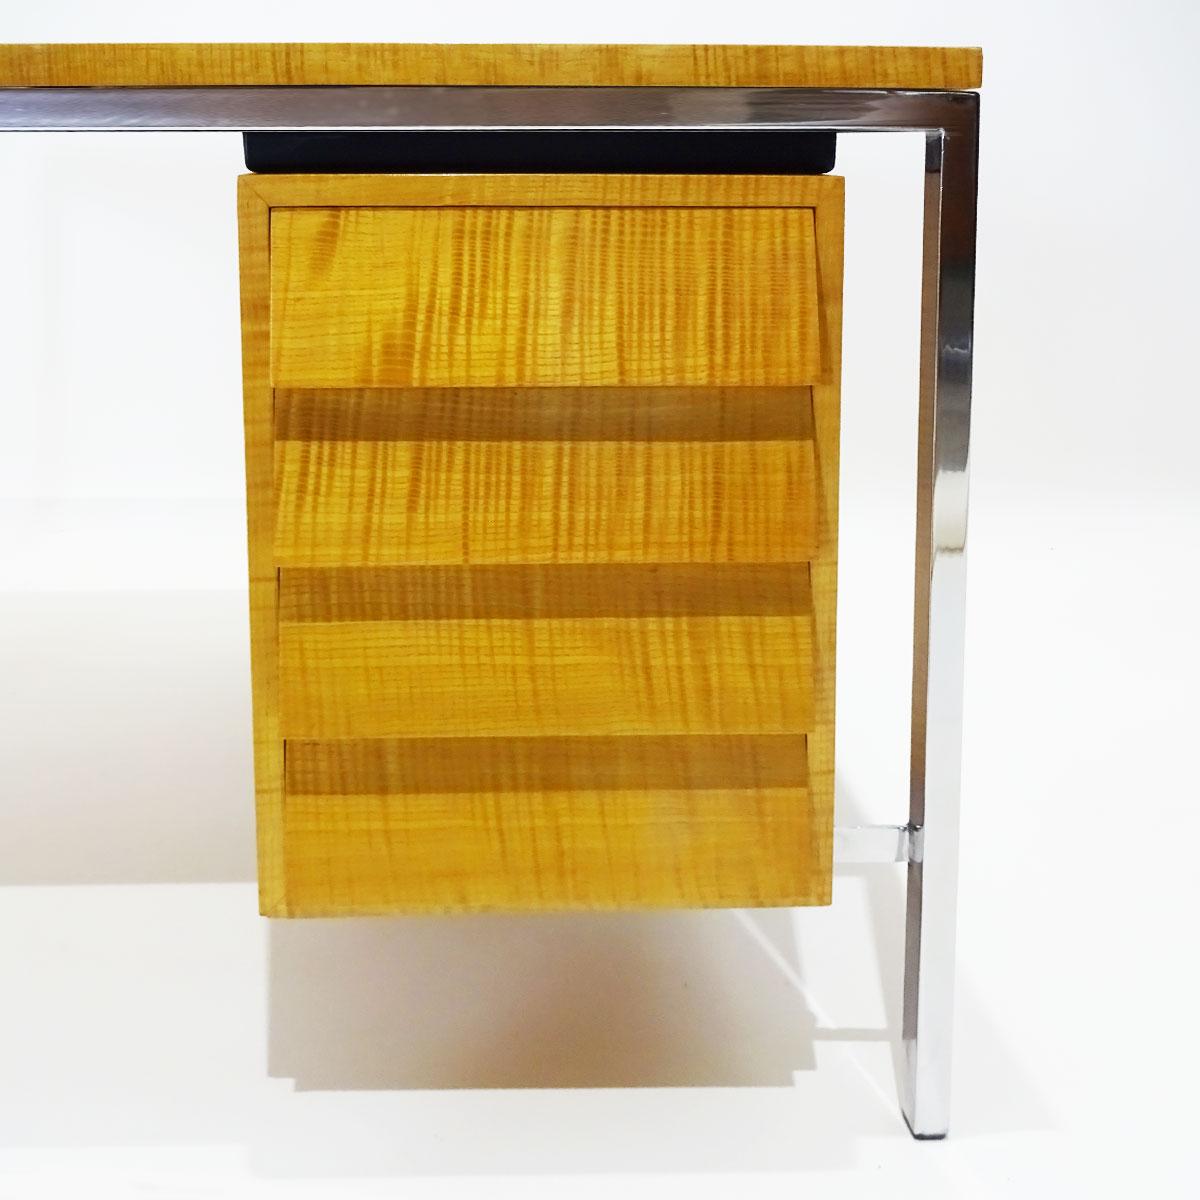 American Early Polished Steel and Tiger Stripe Maple Desk Attributed to Florence Knoll